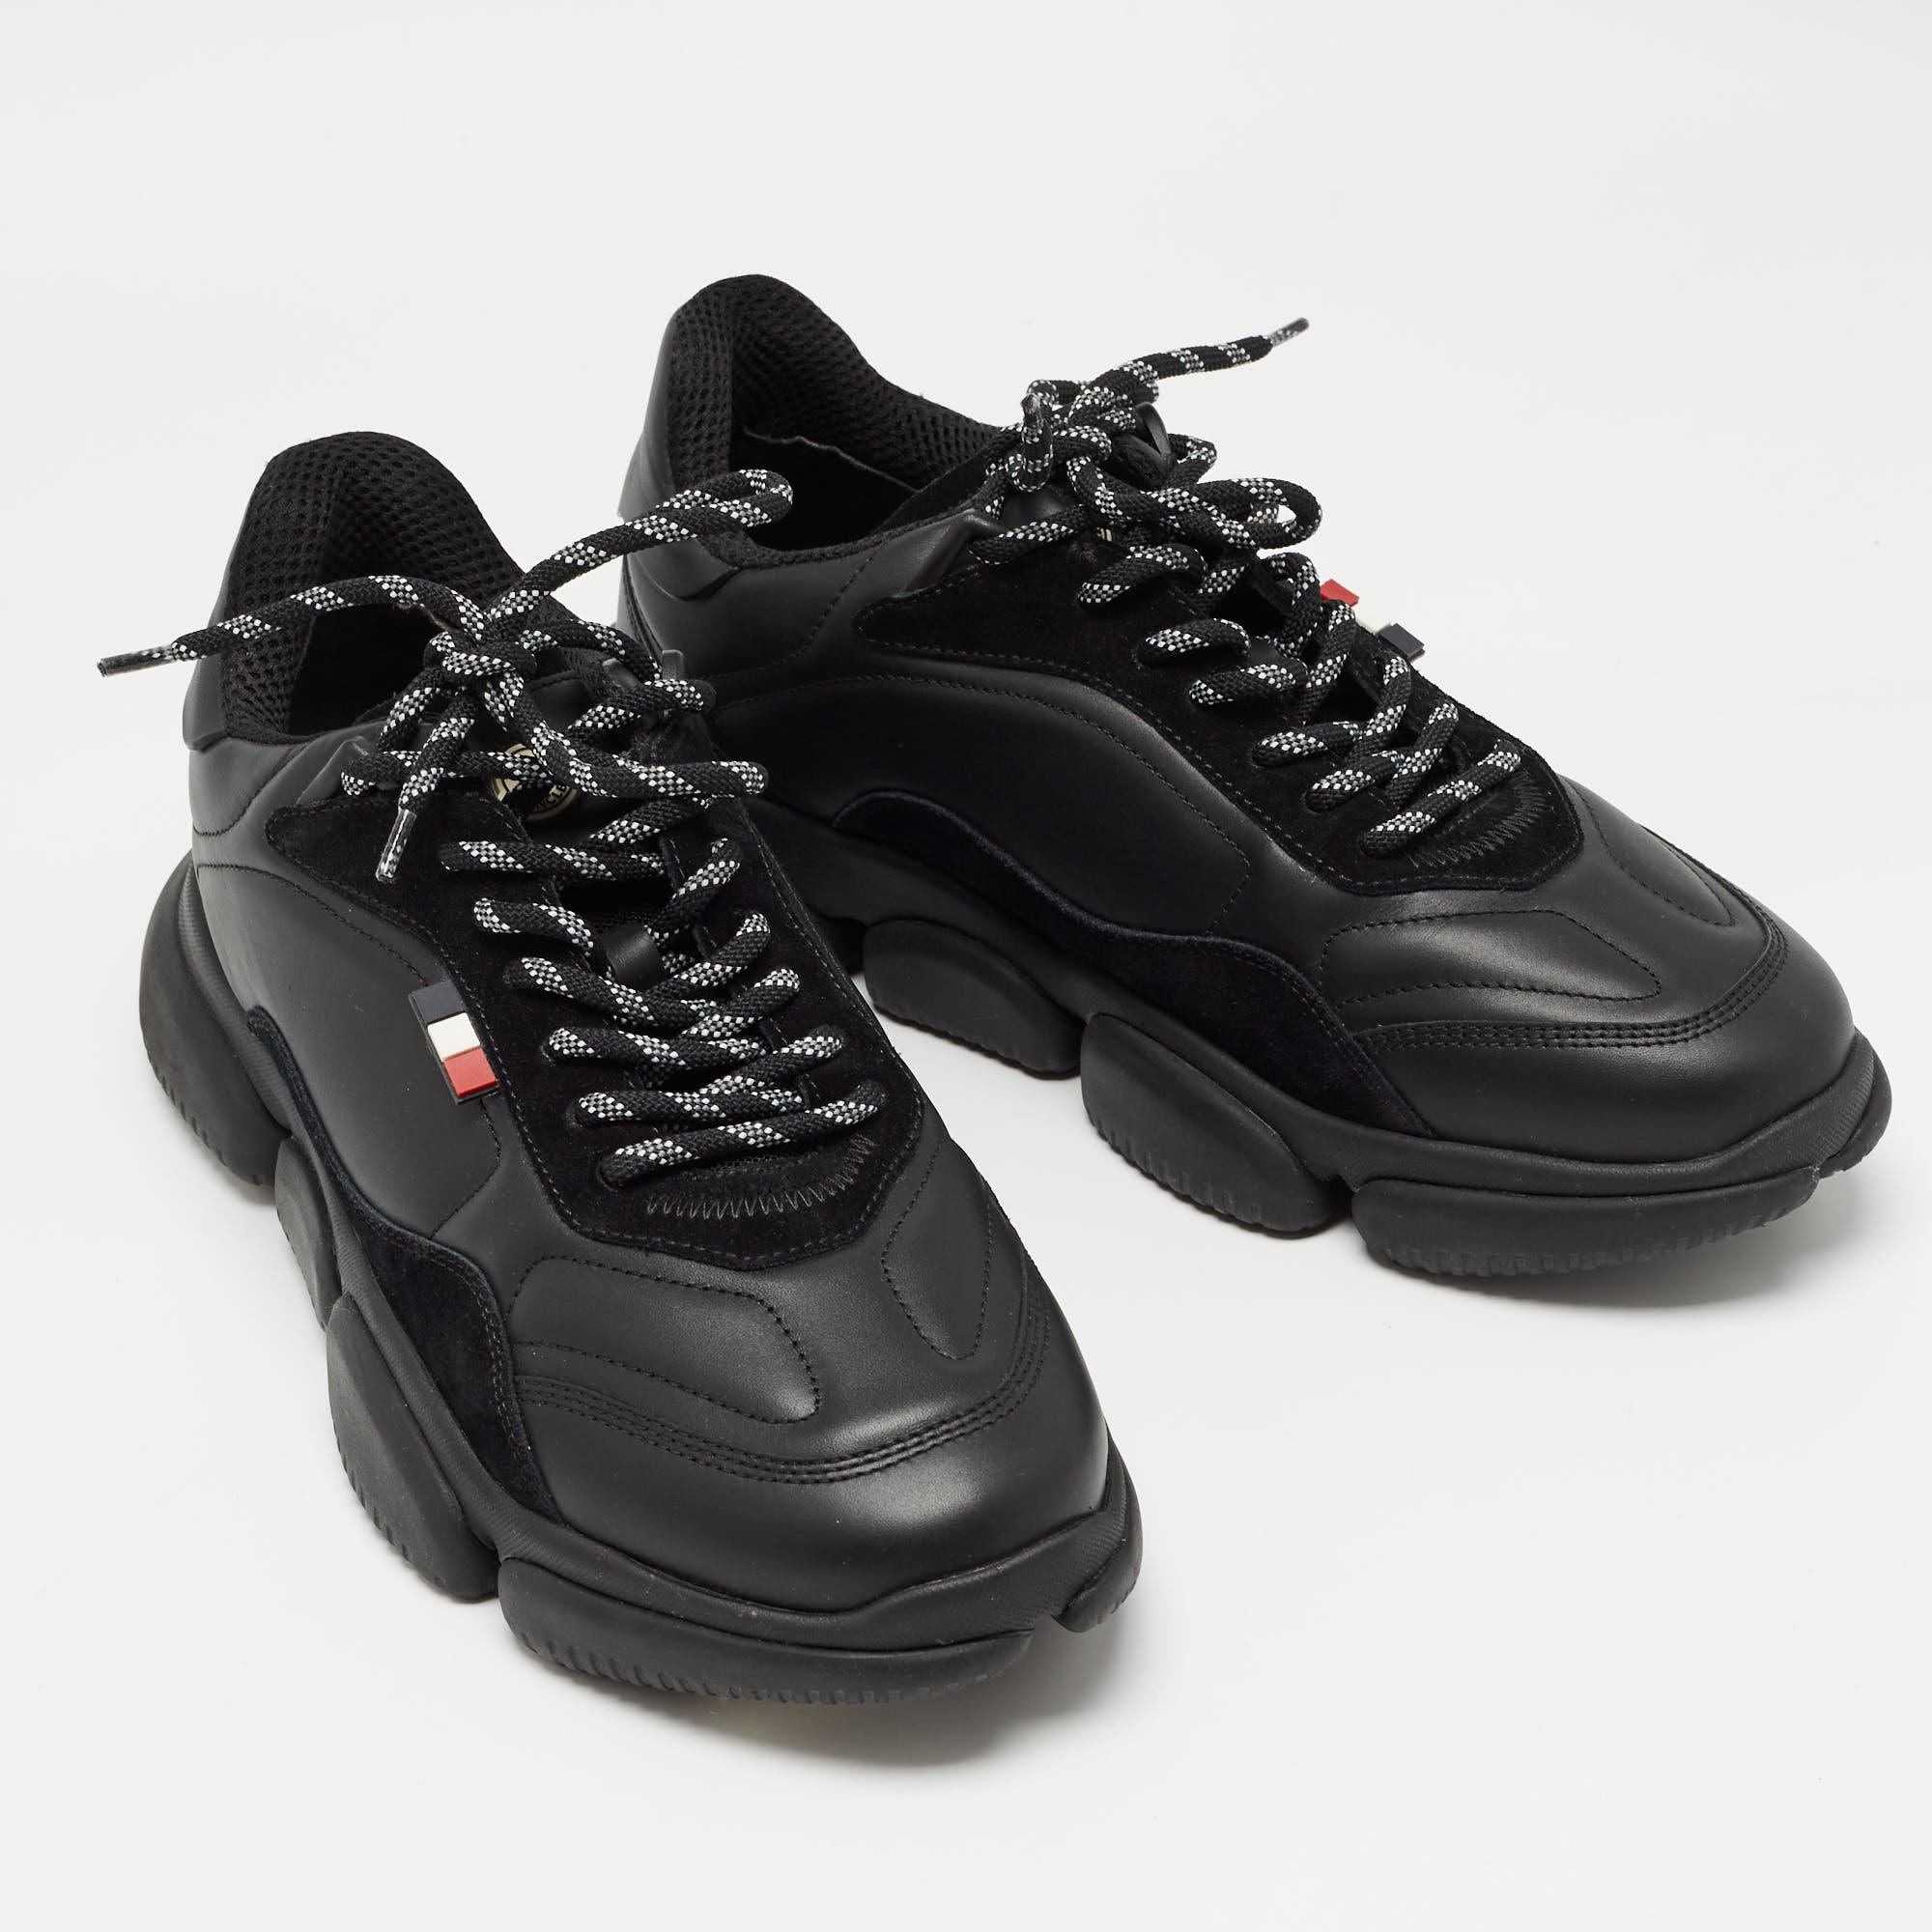 Moncler Black Leather Low Top Sneakers Size 43 2